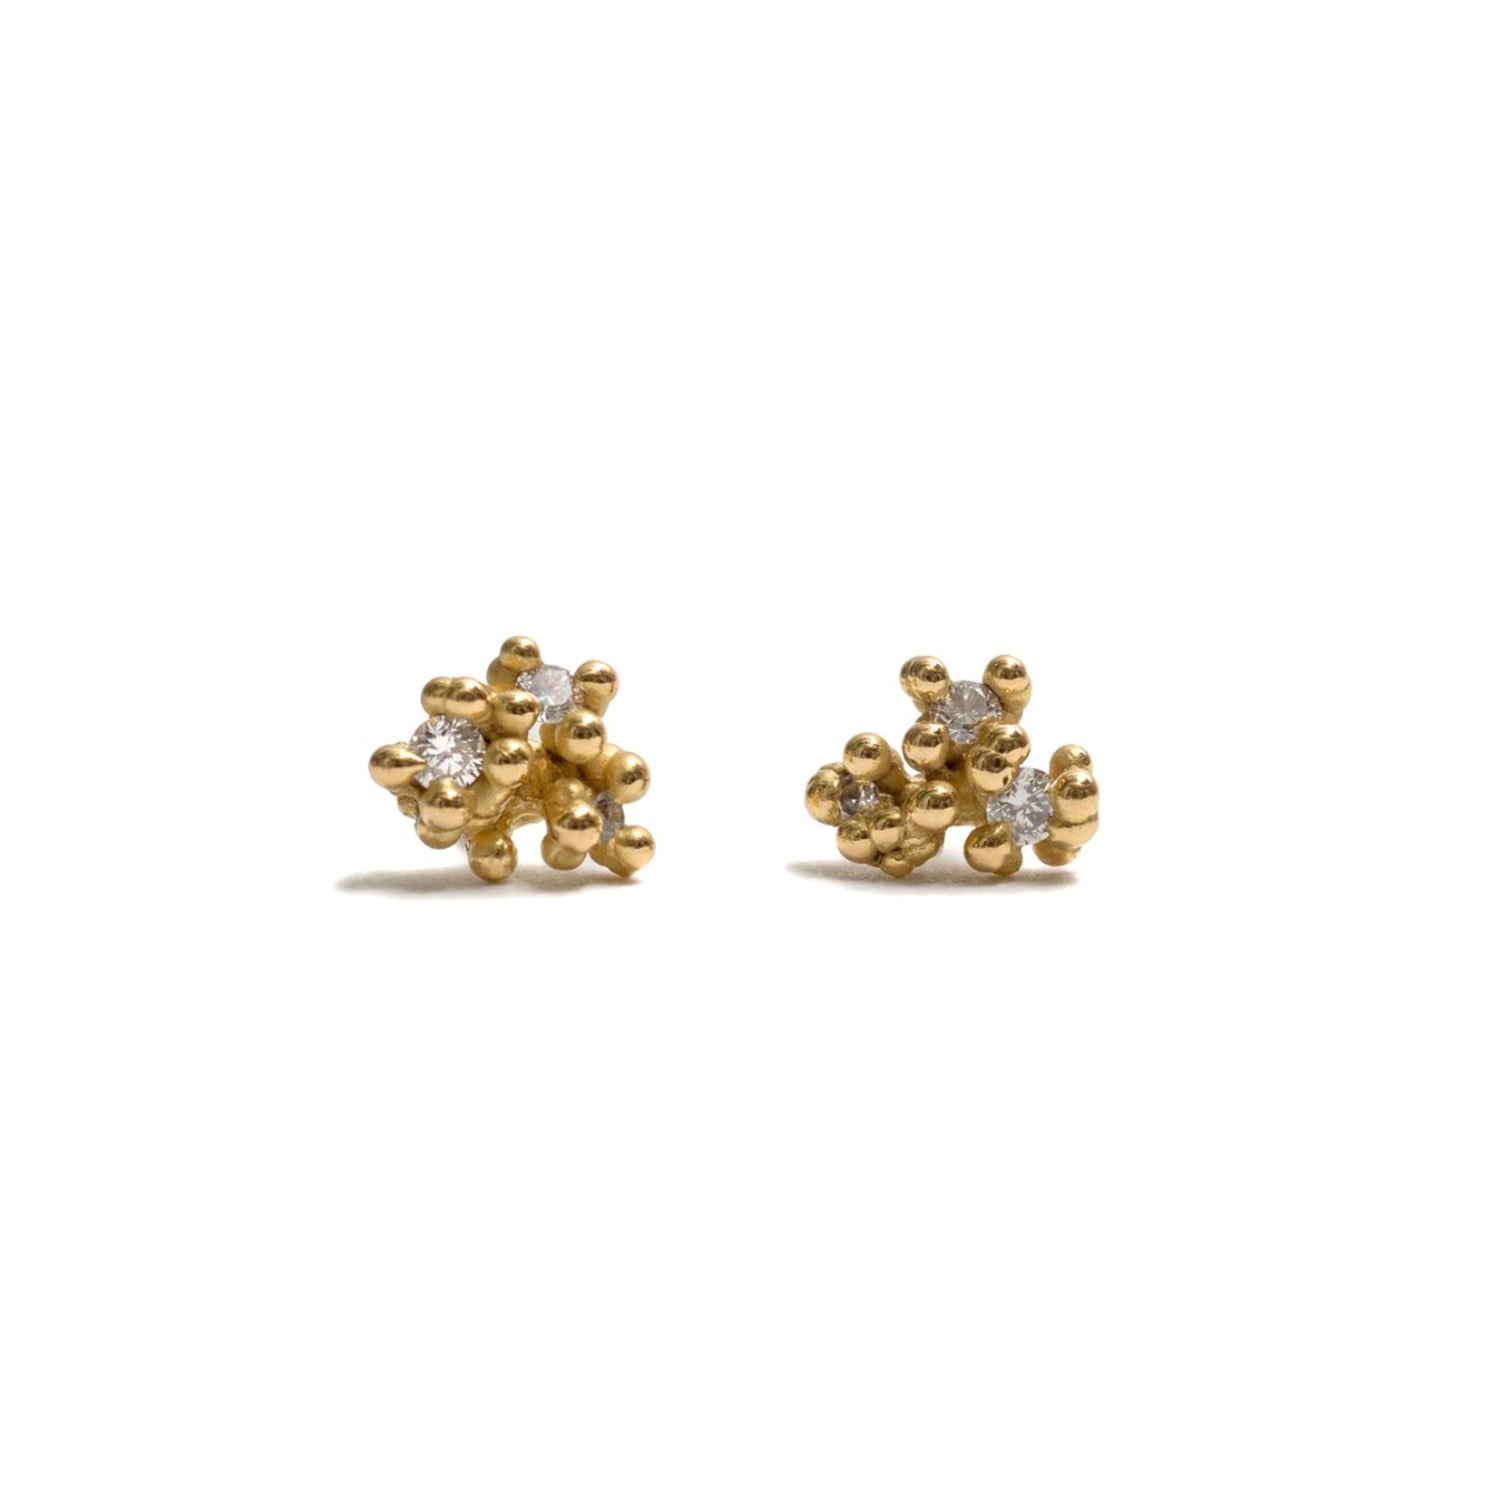 Ruth Tomlinson 18ct yellow gold cluster beaded granulation stud earrings set with 3 white diamonds.